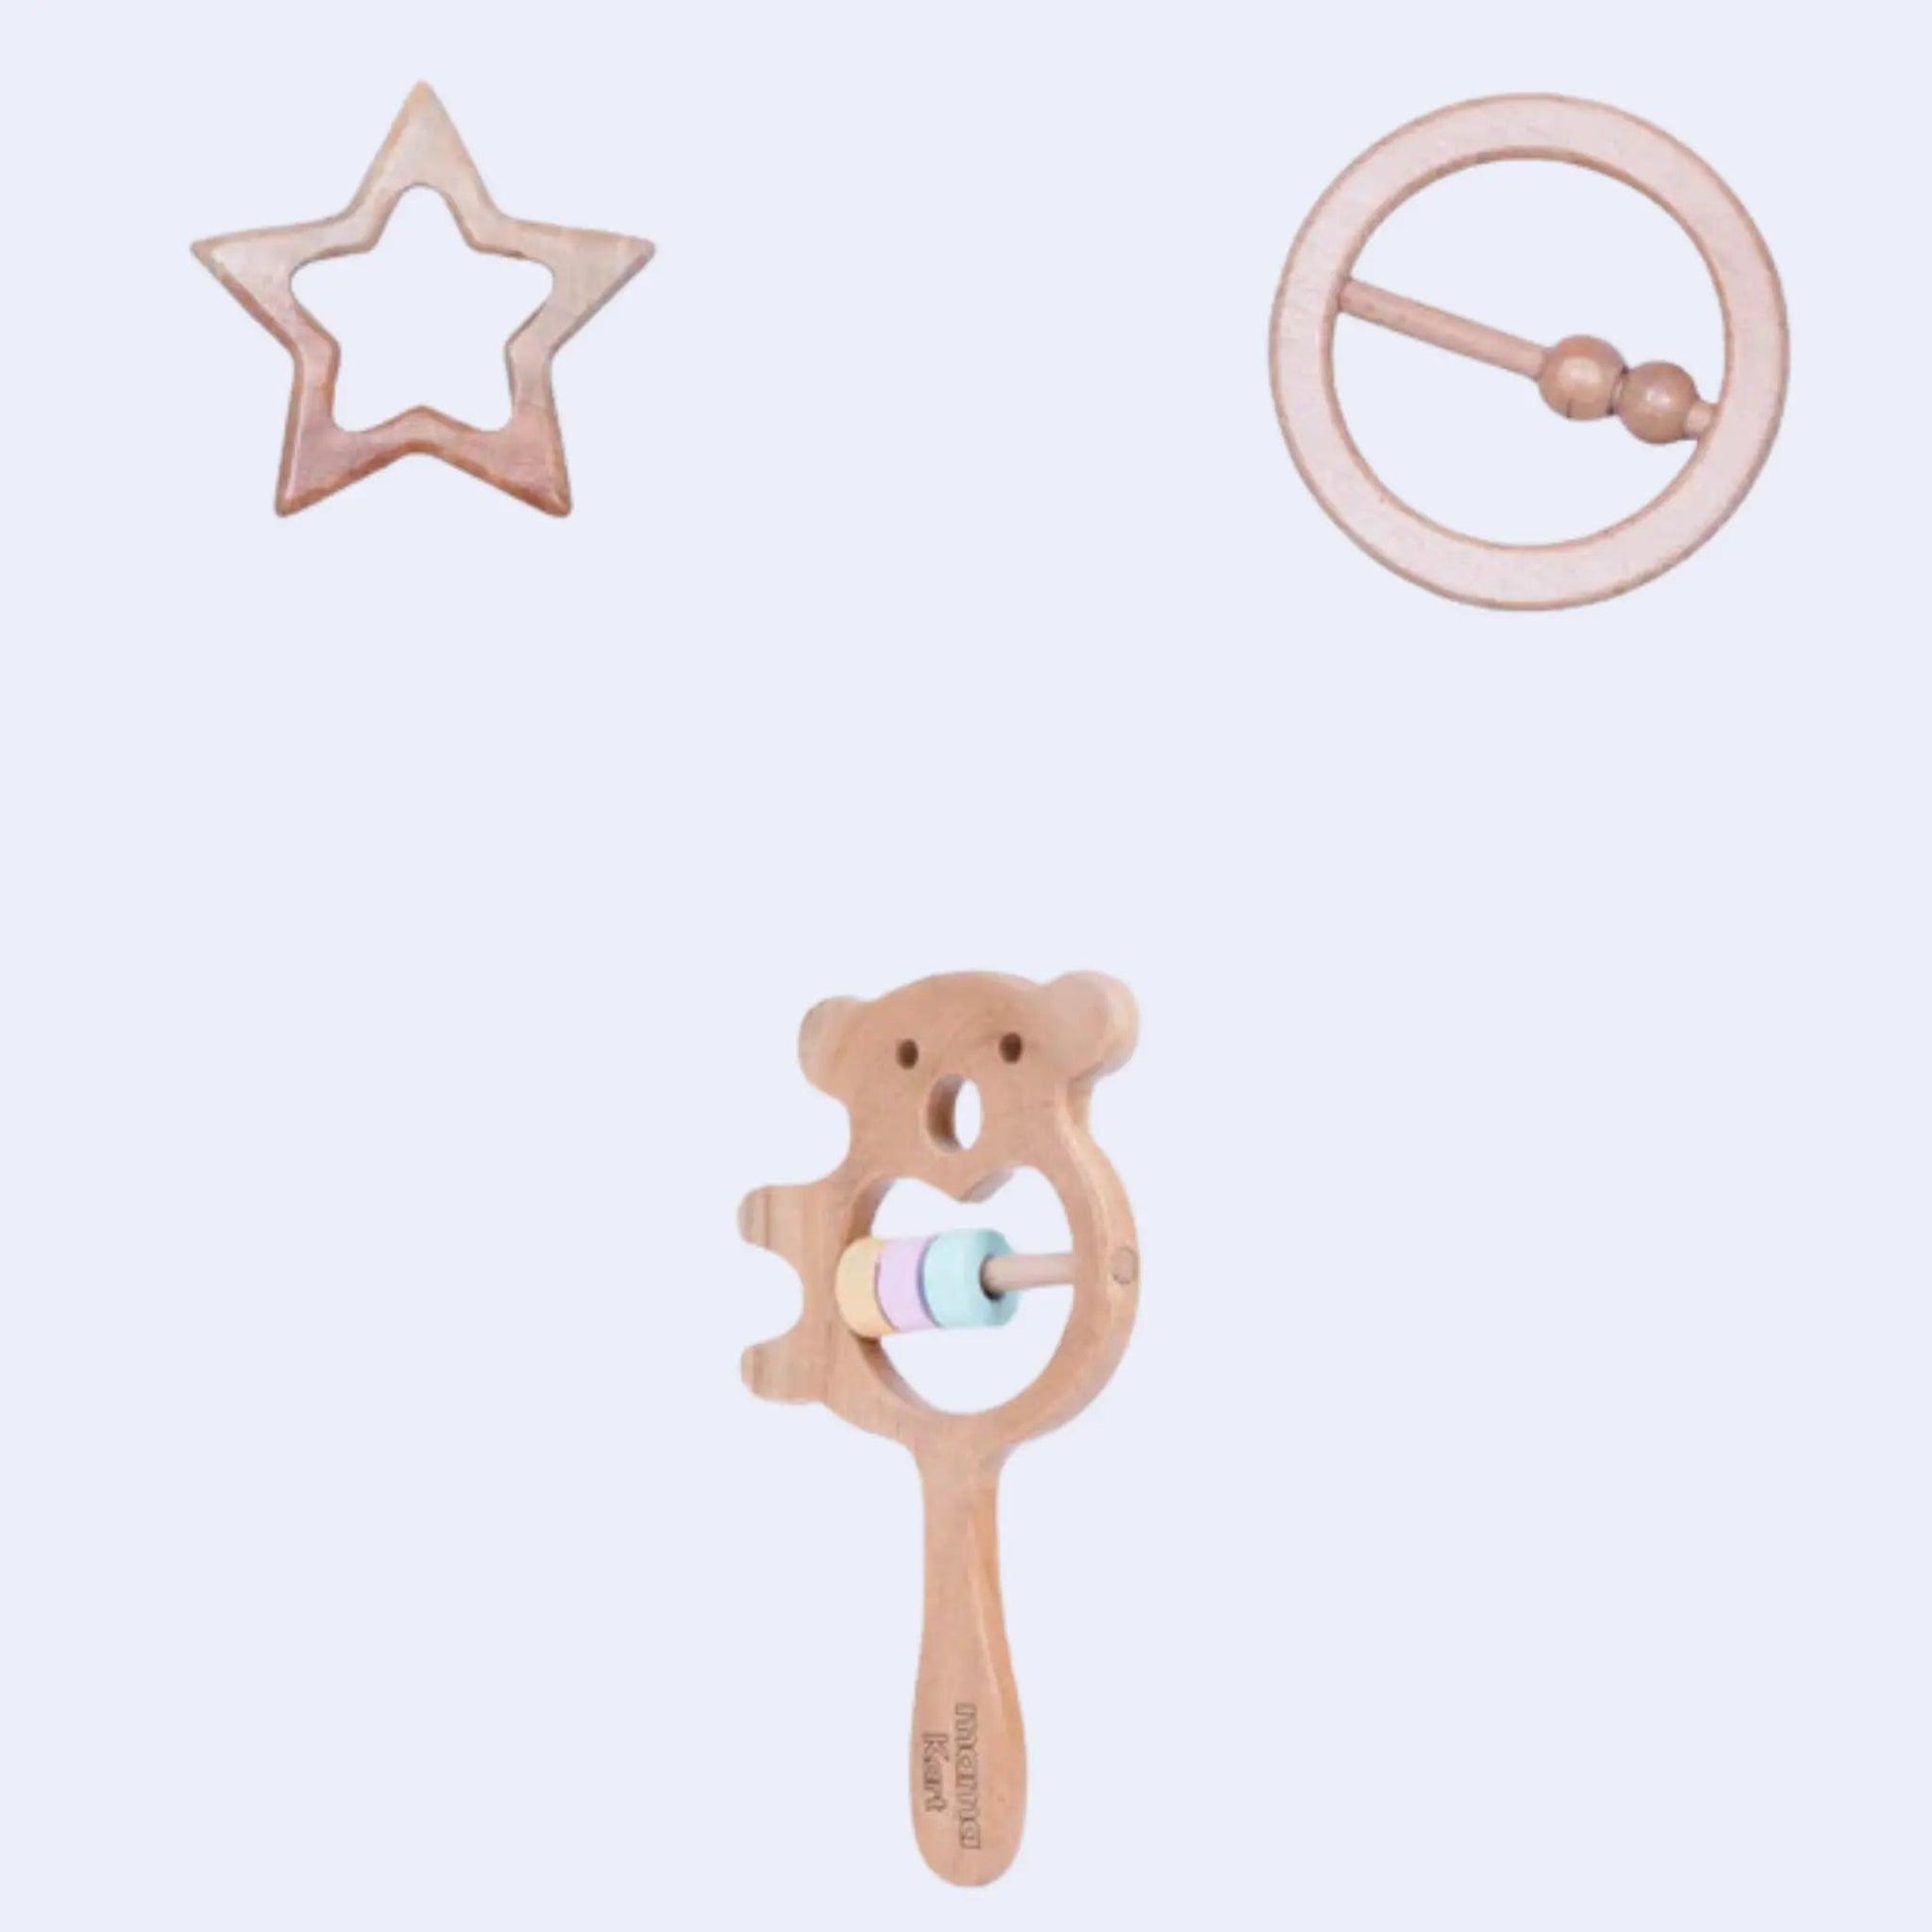 A combo set of baby toys including a wooden bear, round rattle, and neem star teether for ages 0-12 months